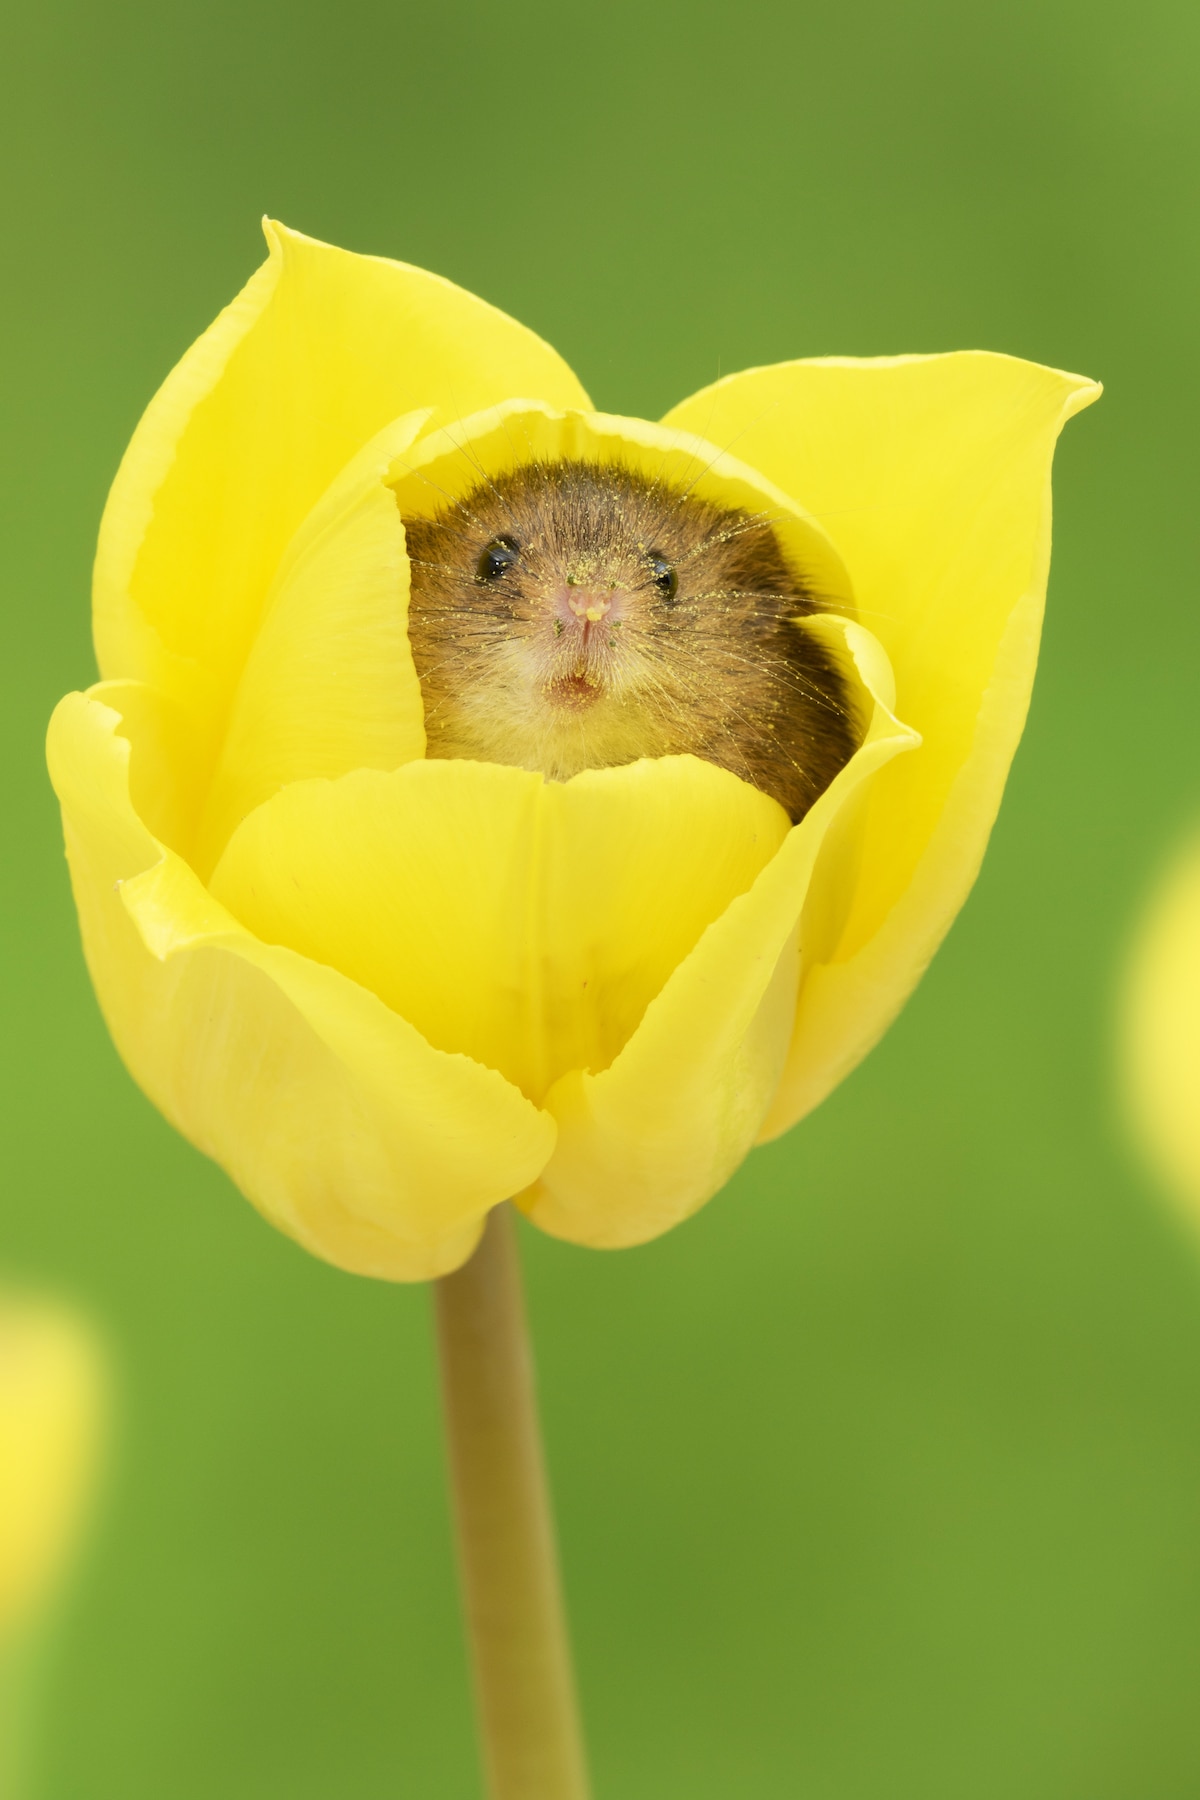 Hue Redner S Blog Adorable Photos Of Harvest Mice Frolicking In Tulips Will Make You Smile